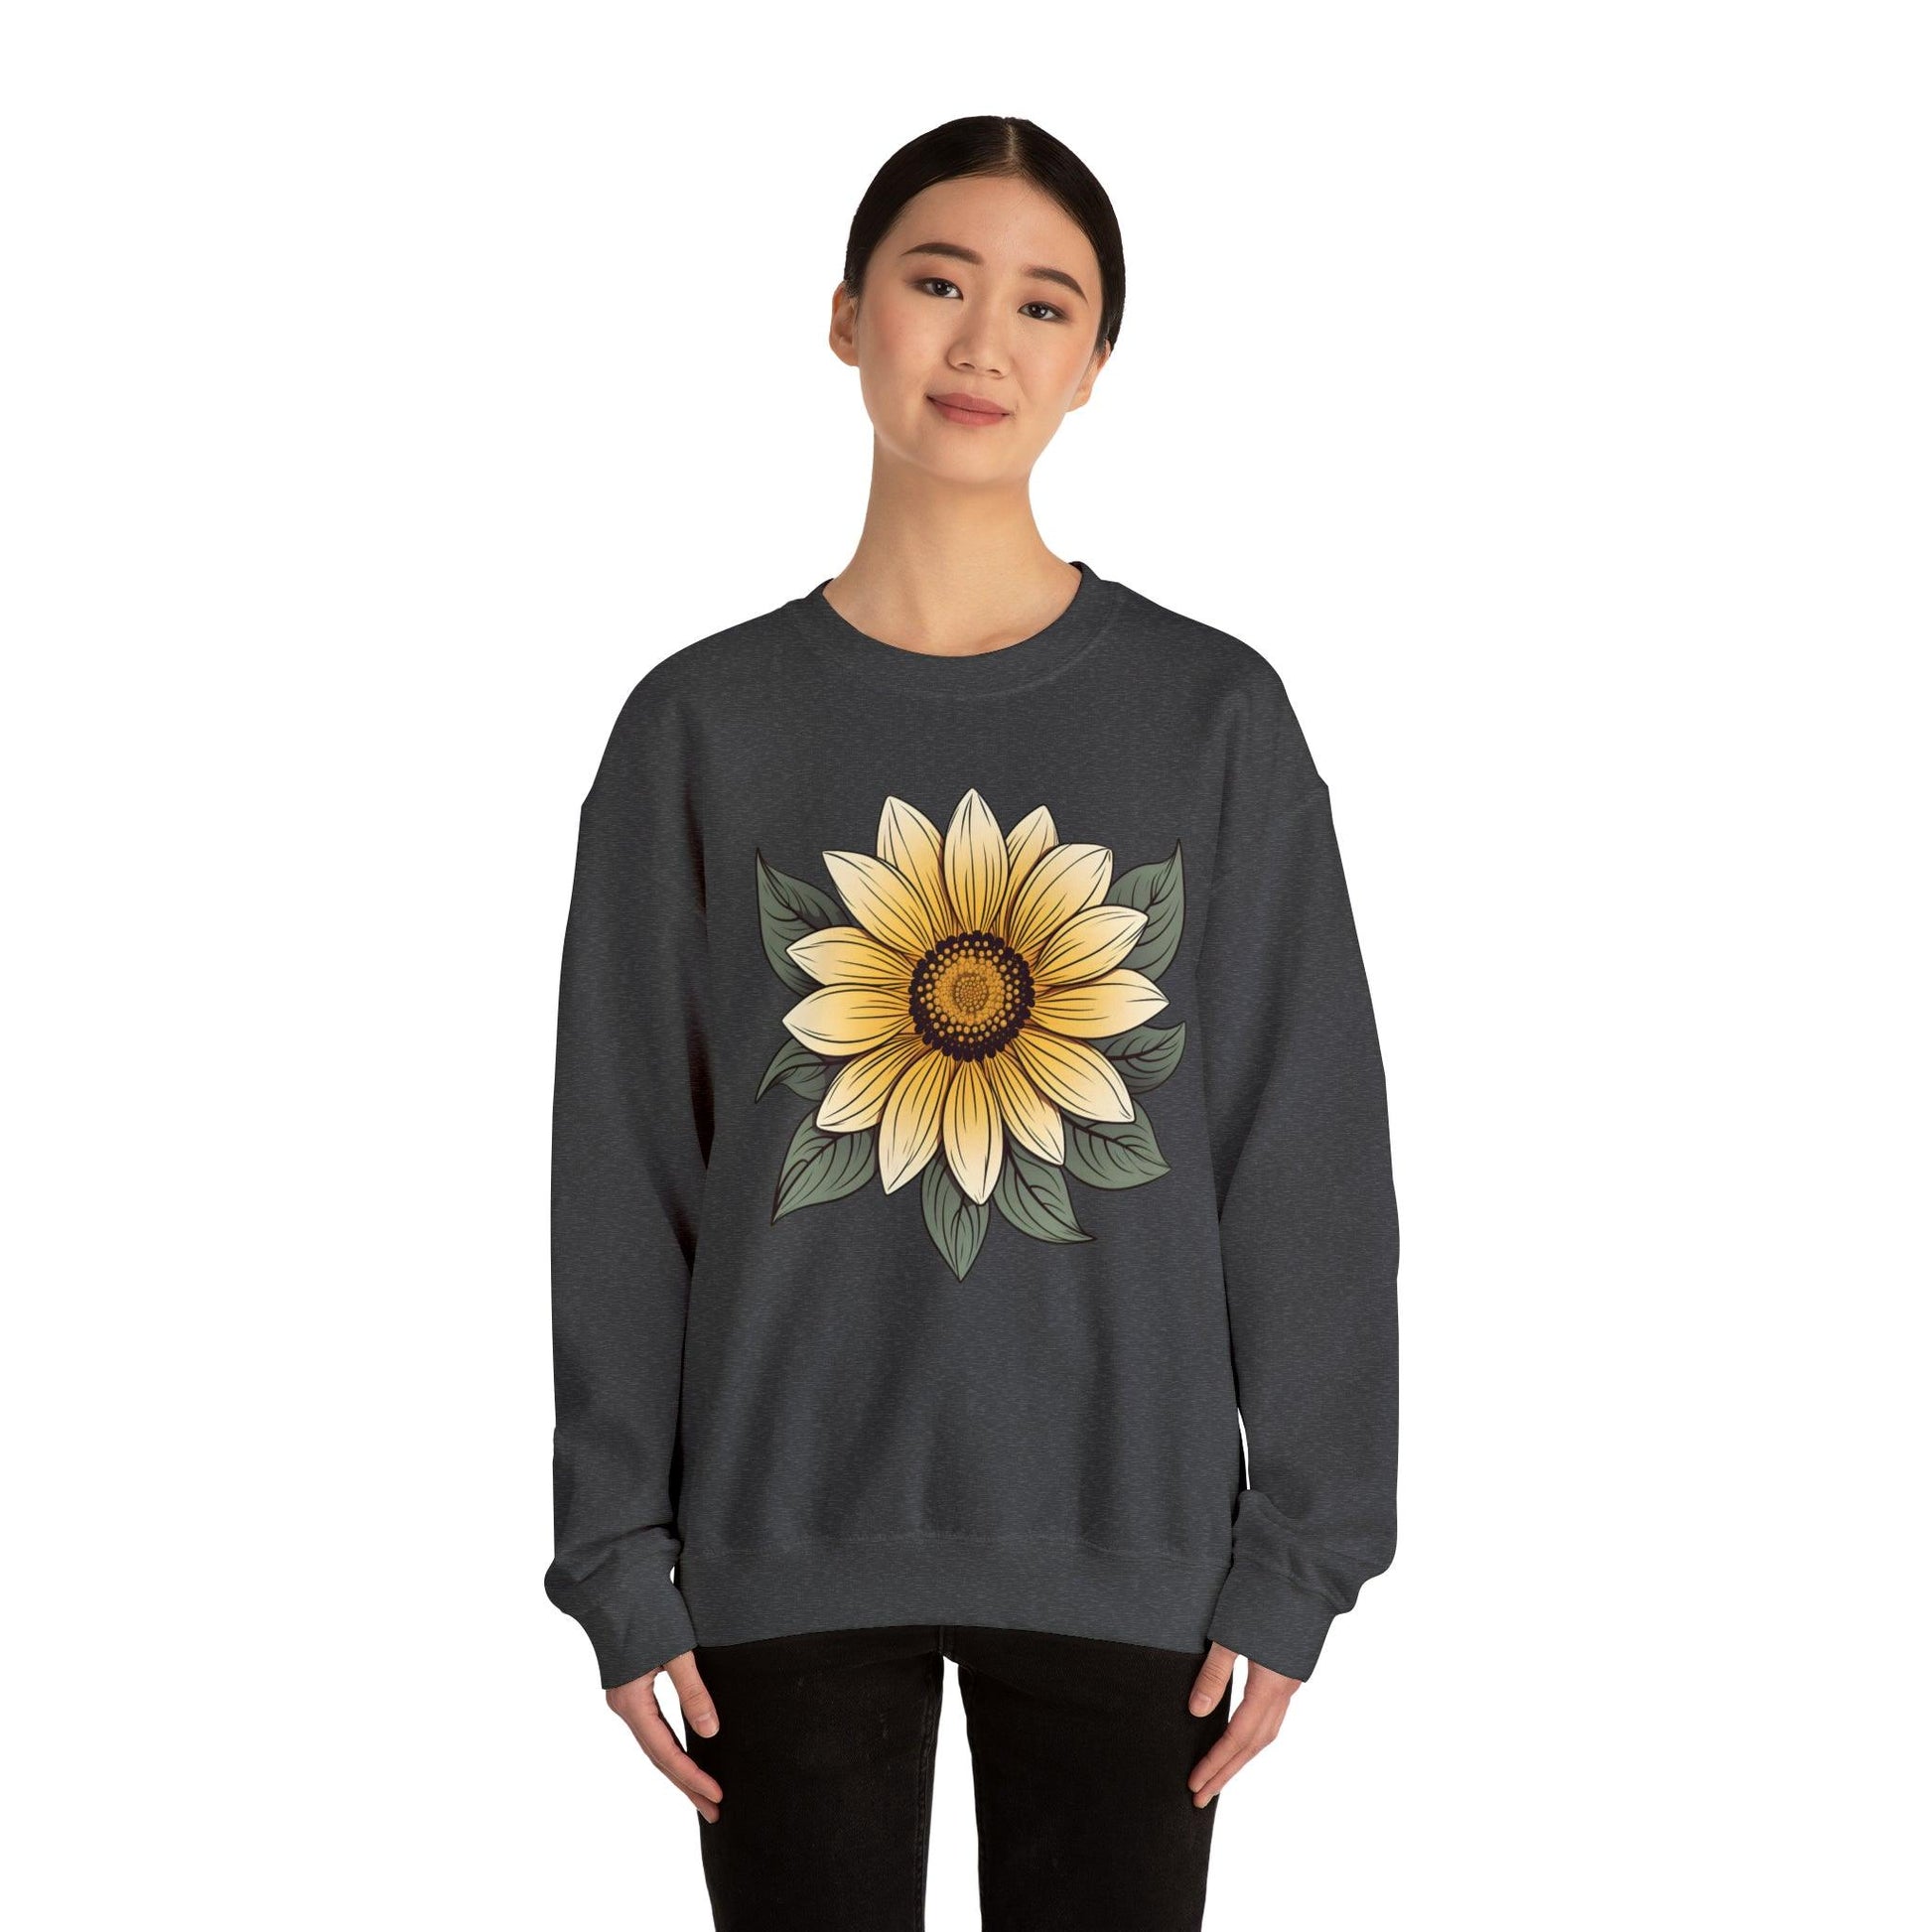 Flower Sweatshirt, Floral Sweatshirt Flower Sweatshirt Flower Sweater, Flower Shirt, Floral Print, Flower TShirt, Perfect Mothers Day Gift - Giftsmojo